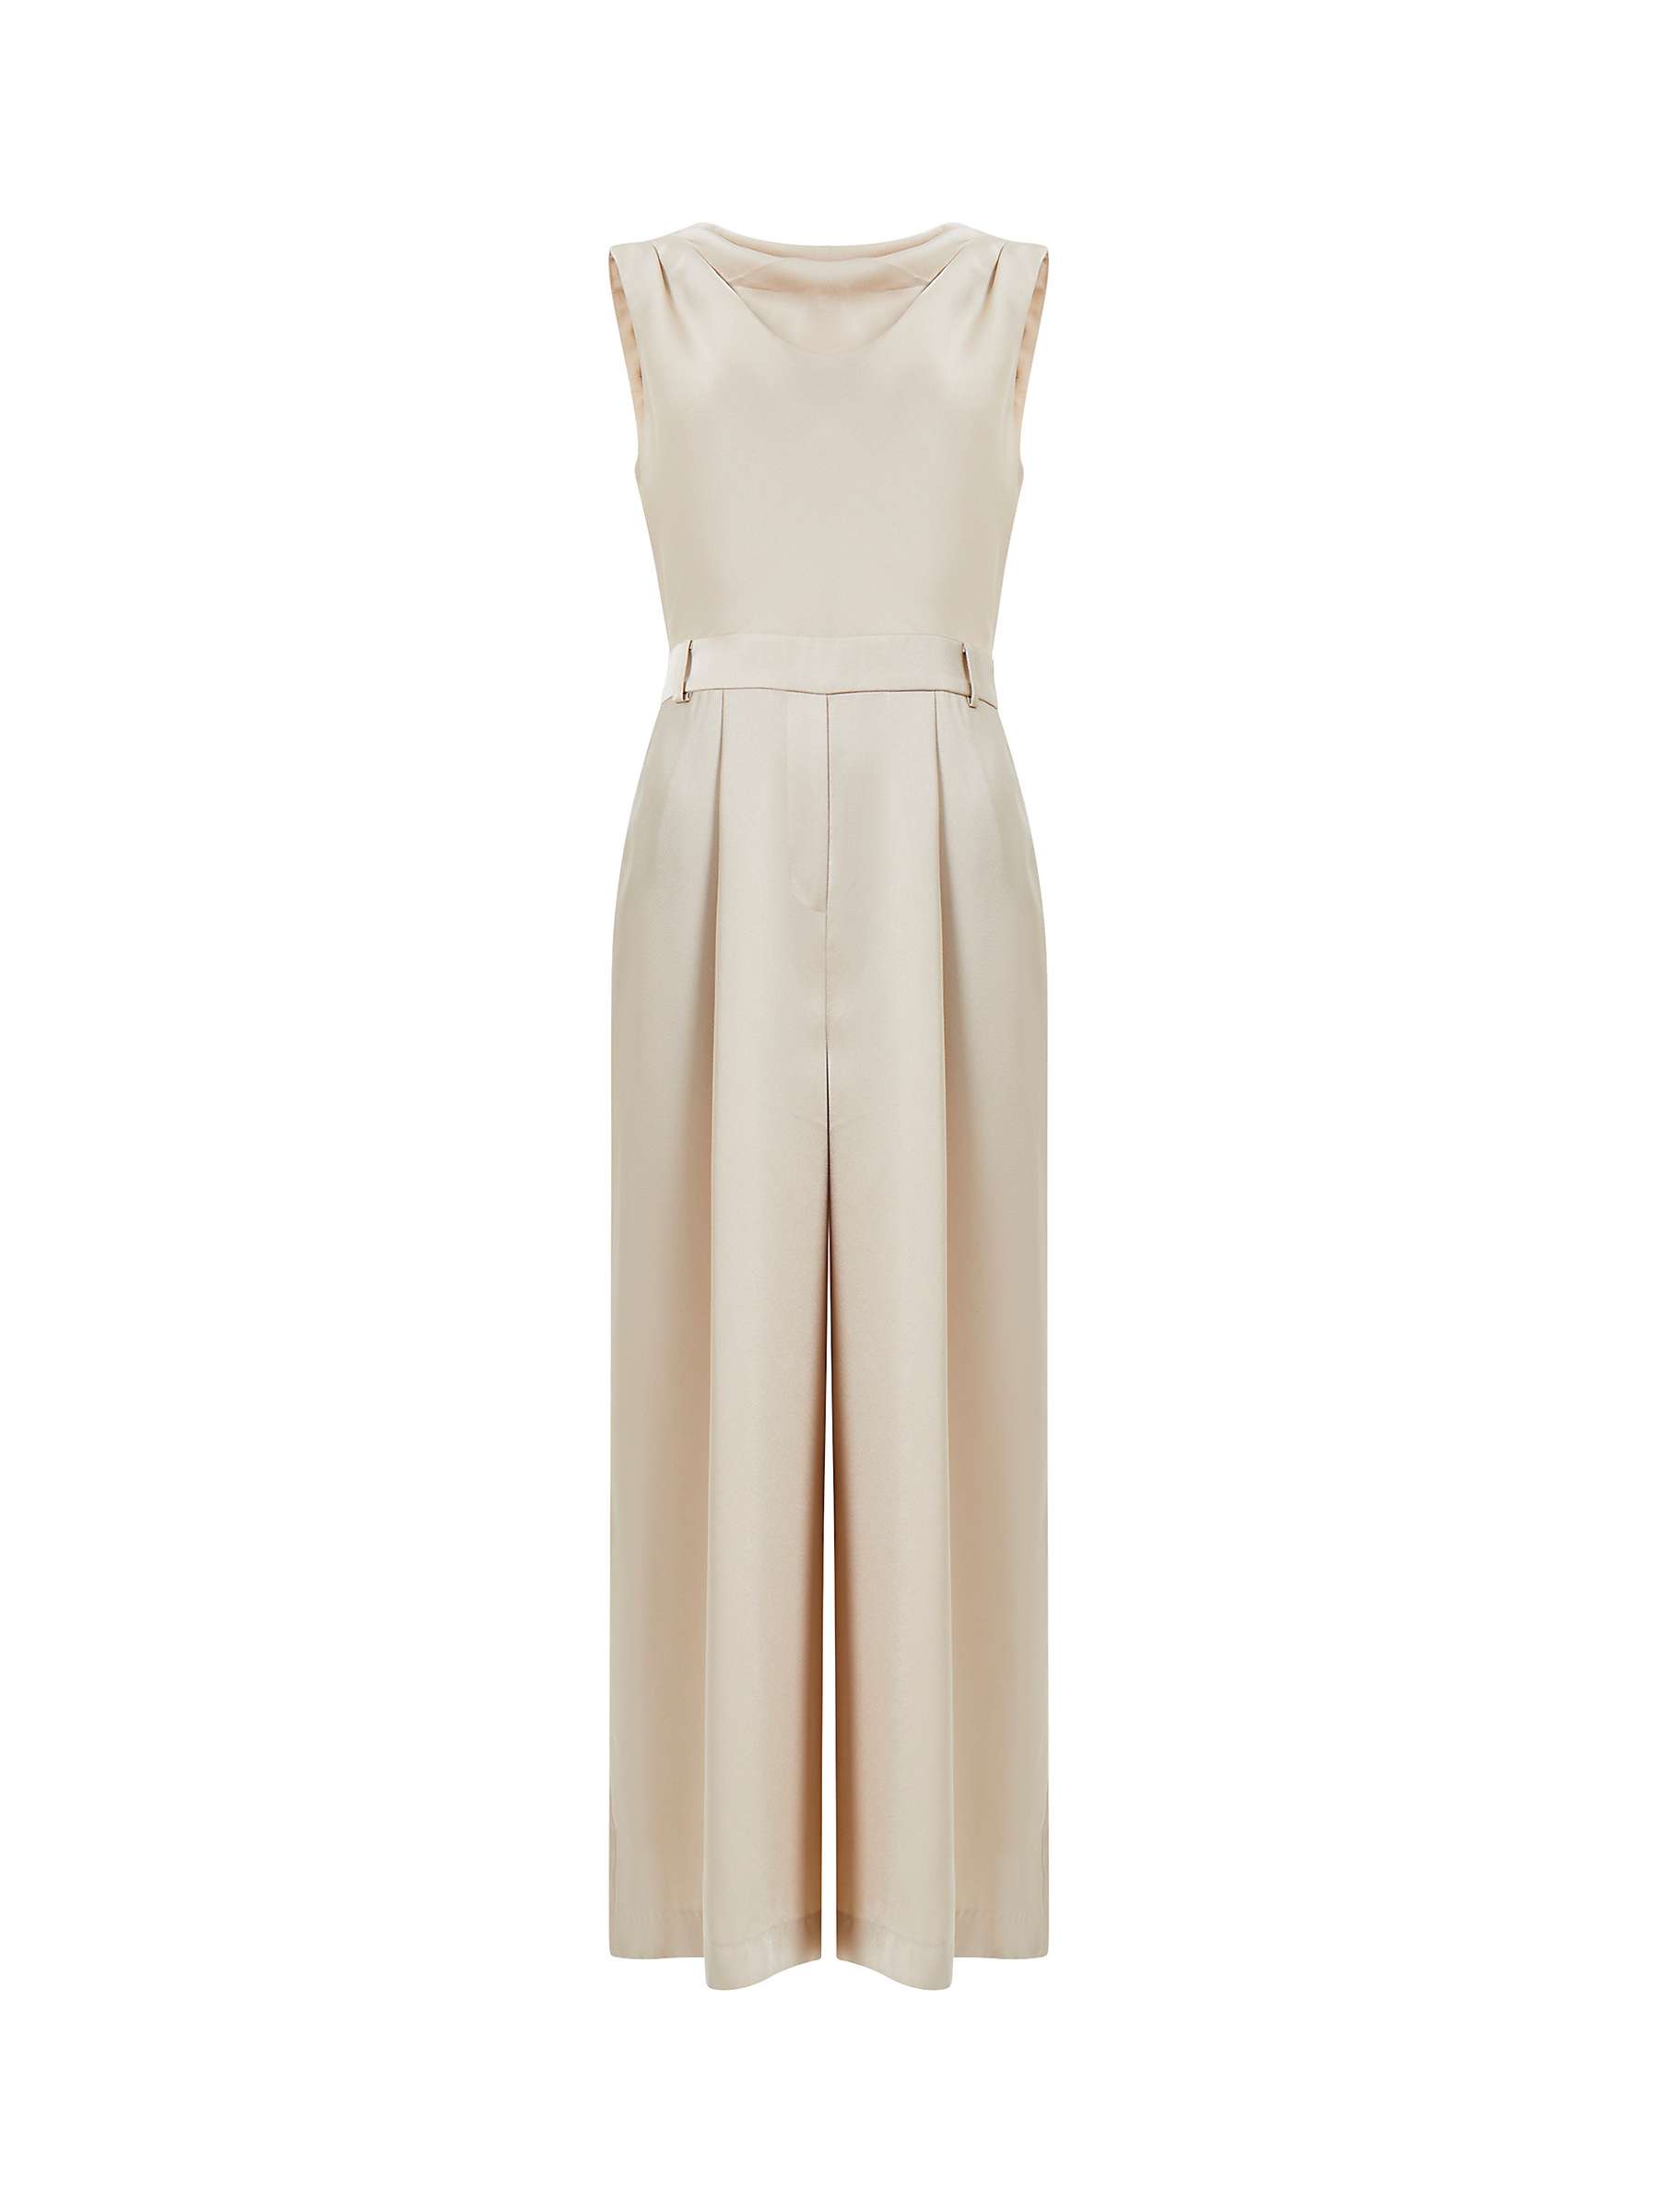 Buy French Connection Harlow Satin Sleeveless Jumpsuit, Oyster Gray Online at johnlewis.com